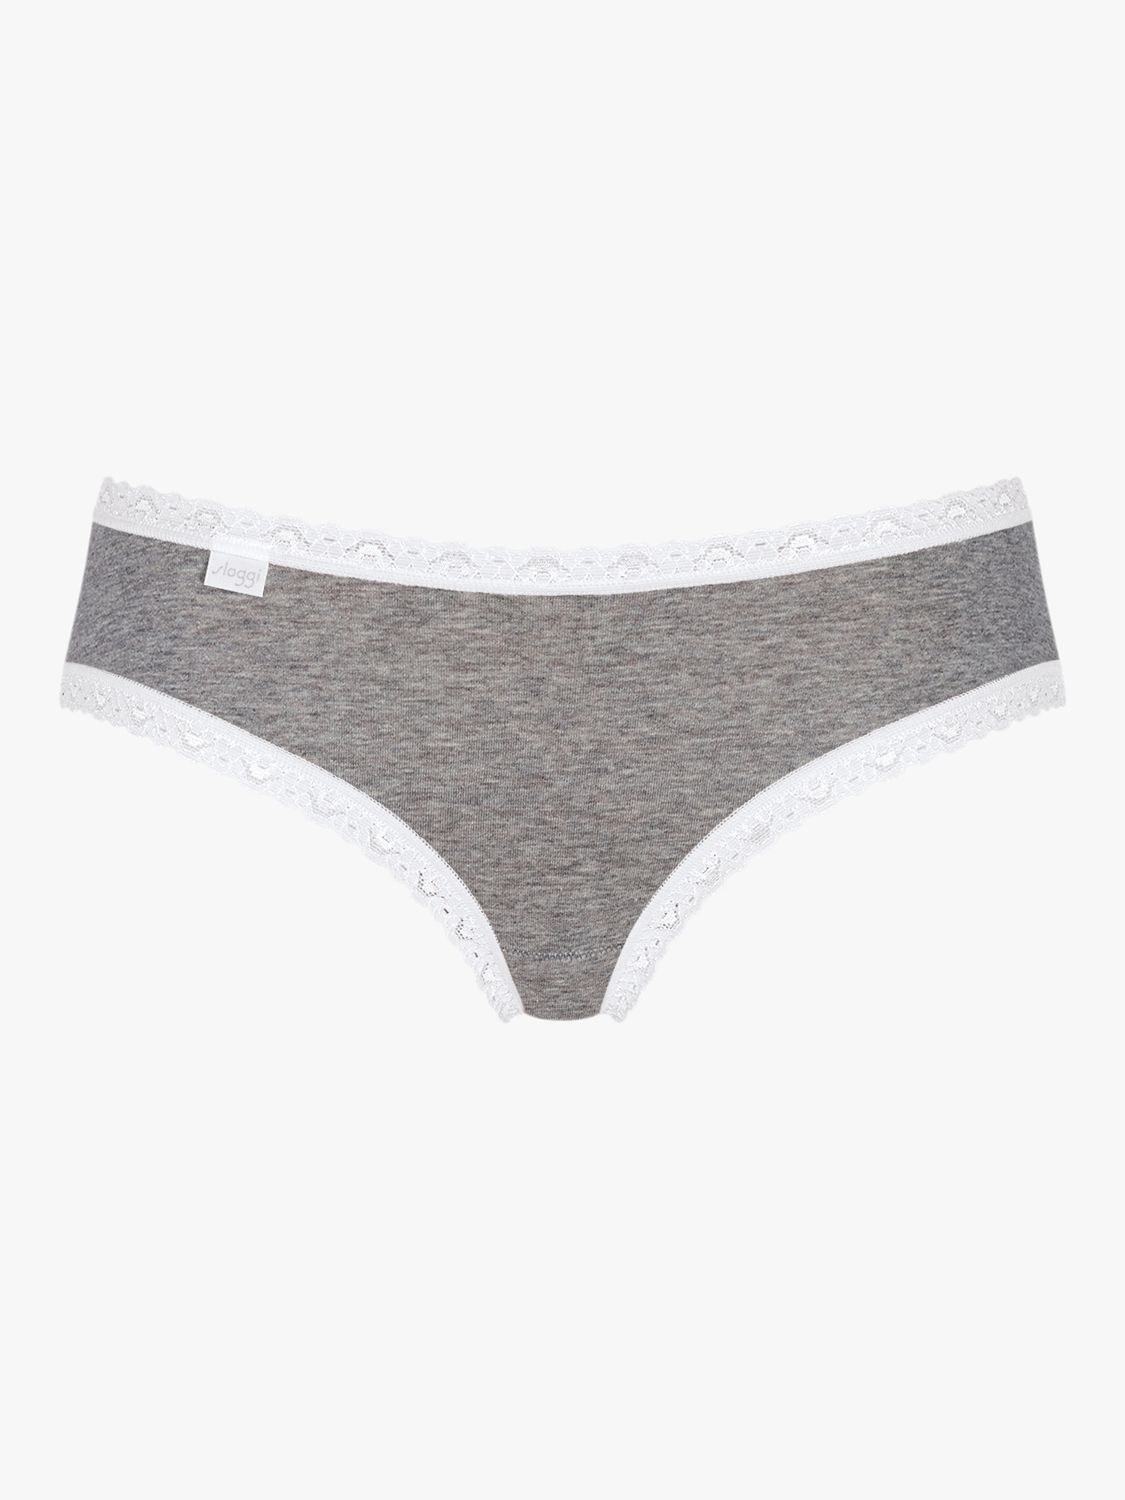 sloggi 24/7 Weekend Hipster Knickers, Pack of 3, White - Light Combination, 8